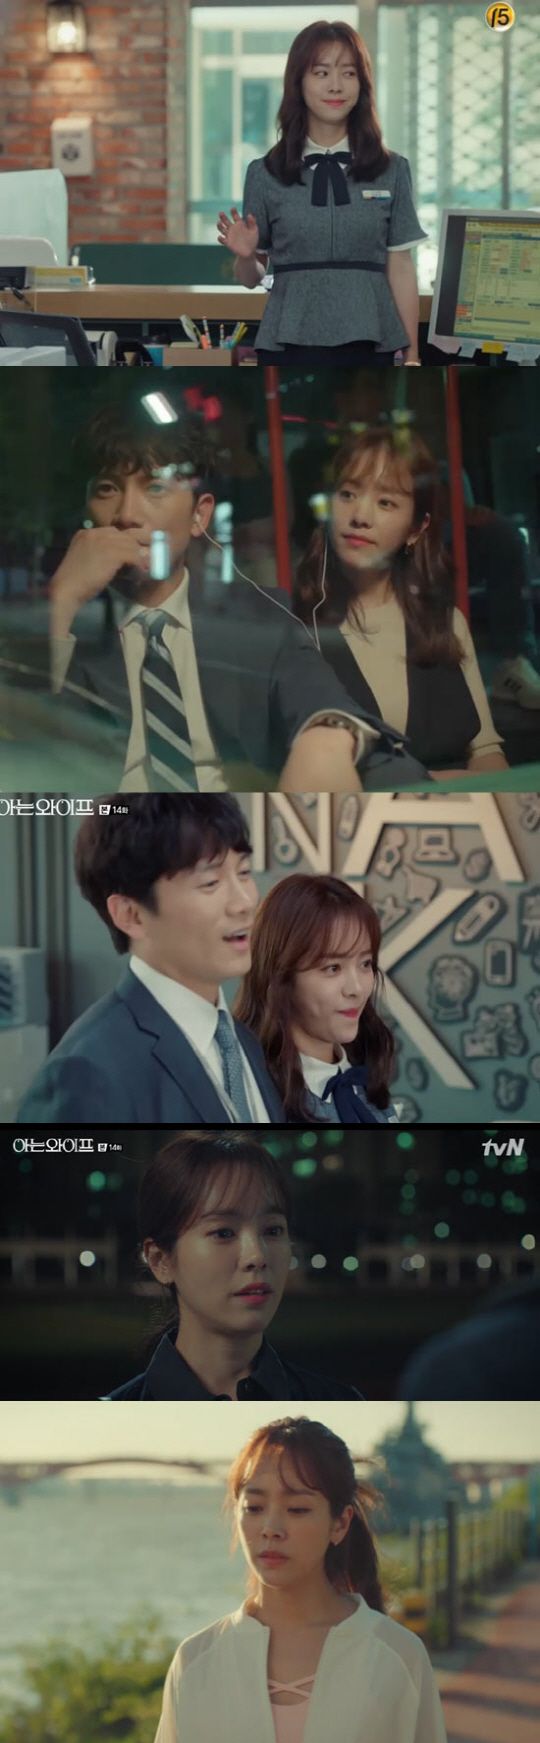 One thing is, I love you. Ill make you happy. I promise.Ji Sung reaps iron wall and Confessions love for Han Ji-minIn the TVN drama Knowing Wife, which was broadcast on the 13th, changes in the relationship between Seo Woo Jin (Han Ji-min) and Cha Ju-hyuk (Ji Sung) were spread.Cha Ju-hyuk continued his life of not loving anyone, imprinting himself unhappily on his married opponent.But Seo Woo Jin, who came to his point, went straight to Cha Ju-hyuk.Cha Ju-hyuk smiled and greeted Cha Ju-hyuk, holding his hand as if to hand over coffee to Cha Ju-hyuk, saying, I would like to ask you for your help in many ways. Cha Ju-hyuk smiled awkwardly as if he were conscious of the surroundings.Cha Ju-hyuk pressed Seo Woo Jin, who persistently followed him, Why do you do this? Why do you want to be happier than a better man?However, Seo Woo Jin confirmed his mind that I can do well from now on.Seo Woo Jin approached the staff of the Gahyeon store who did not remember him at all.It was not difficult to get acquainted with Seo Woo Jin, who already knows their tastes.Cha Ju-hyuk handled it flexibly as what had already gone on and happened, especially the piggy bank throwback of a female customer trying to hit Seo Woo Jin on the head, which also blocked her head.Thankful Seo Woo Jin followed him on the bus, presented him with clothes; Cha Ju-hyuk caught up with the shaking heart.But Seo Woo Jin came out to Gahyeon store family members saying, I like Cha Ju-hyuk.Cha Ju-hyuk shouted really not at the party as all the staff tried to connect the two peoples relationship, and the atmosphere became cheap.See Woo Jin, who was so bitter drinking alone, chased Cha Ju-hyuk and said, I cant really do it. I thought I could try.I know what youre doing. Is this rather bothering you. Im too much of my position. Ill ask you one last time.Is it really not possible? Cha Ju-hyuk turned away from her again.Cha Ju-hyuk also pushed back Lee Hee-won (Ganghanna Boone), whom he met again.Lee Hee-won, as he did before the change, said, I used to like you before. But Cha Ju-hyuk changed, he said, You did.I did not have much eyes to see men. After leaving the place first, I left the word I am happy, do not let go of the cello. Seo Woo Jin, who was rejected by Cha Ju-hyuk and treated only as a boss, told him, After a while, I just get cool.When did we have such a time? My close sister told me that she would come to Hong Kong Bank, but my mother was caught and could not decide.Should I go? Cha Ju-hyuk said, Would not it be an opportunity to be Hong Kong Bank side?Seo Woo Jin kept Cha Ju-hyuk away; then, with Cha Ju-hyuk, he took a bus to work, rejecting Yoon Dae-ris offer to go to work together.Cha Ju-hyuk, who happened to watch her ride a bus, recalled that the bus had a big accident with a truck behind it and took the car away.Cha Ju-hyuk, who blocked the bus accident, hugged Seo Woo Jin, who got off the bus, because he realized the joy of being safe and his own love for her.Cha Ju-hyuk said, I dont know all conscience guilt. One thing is, I love you so much. Ill make you happy. I promise.